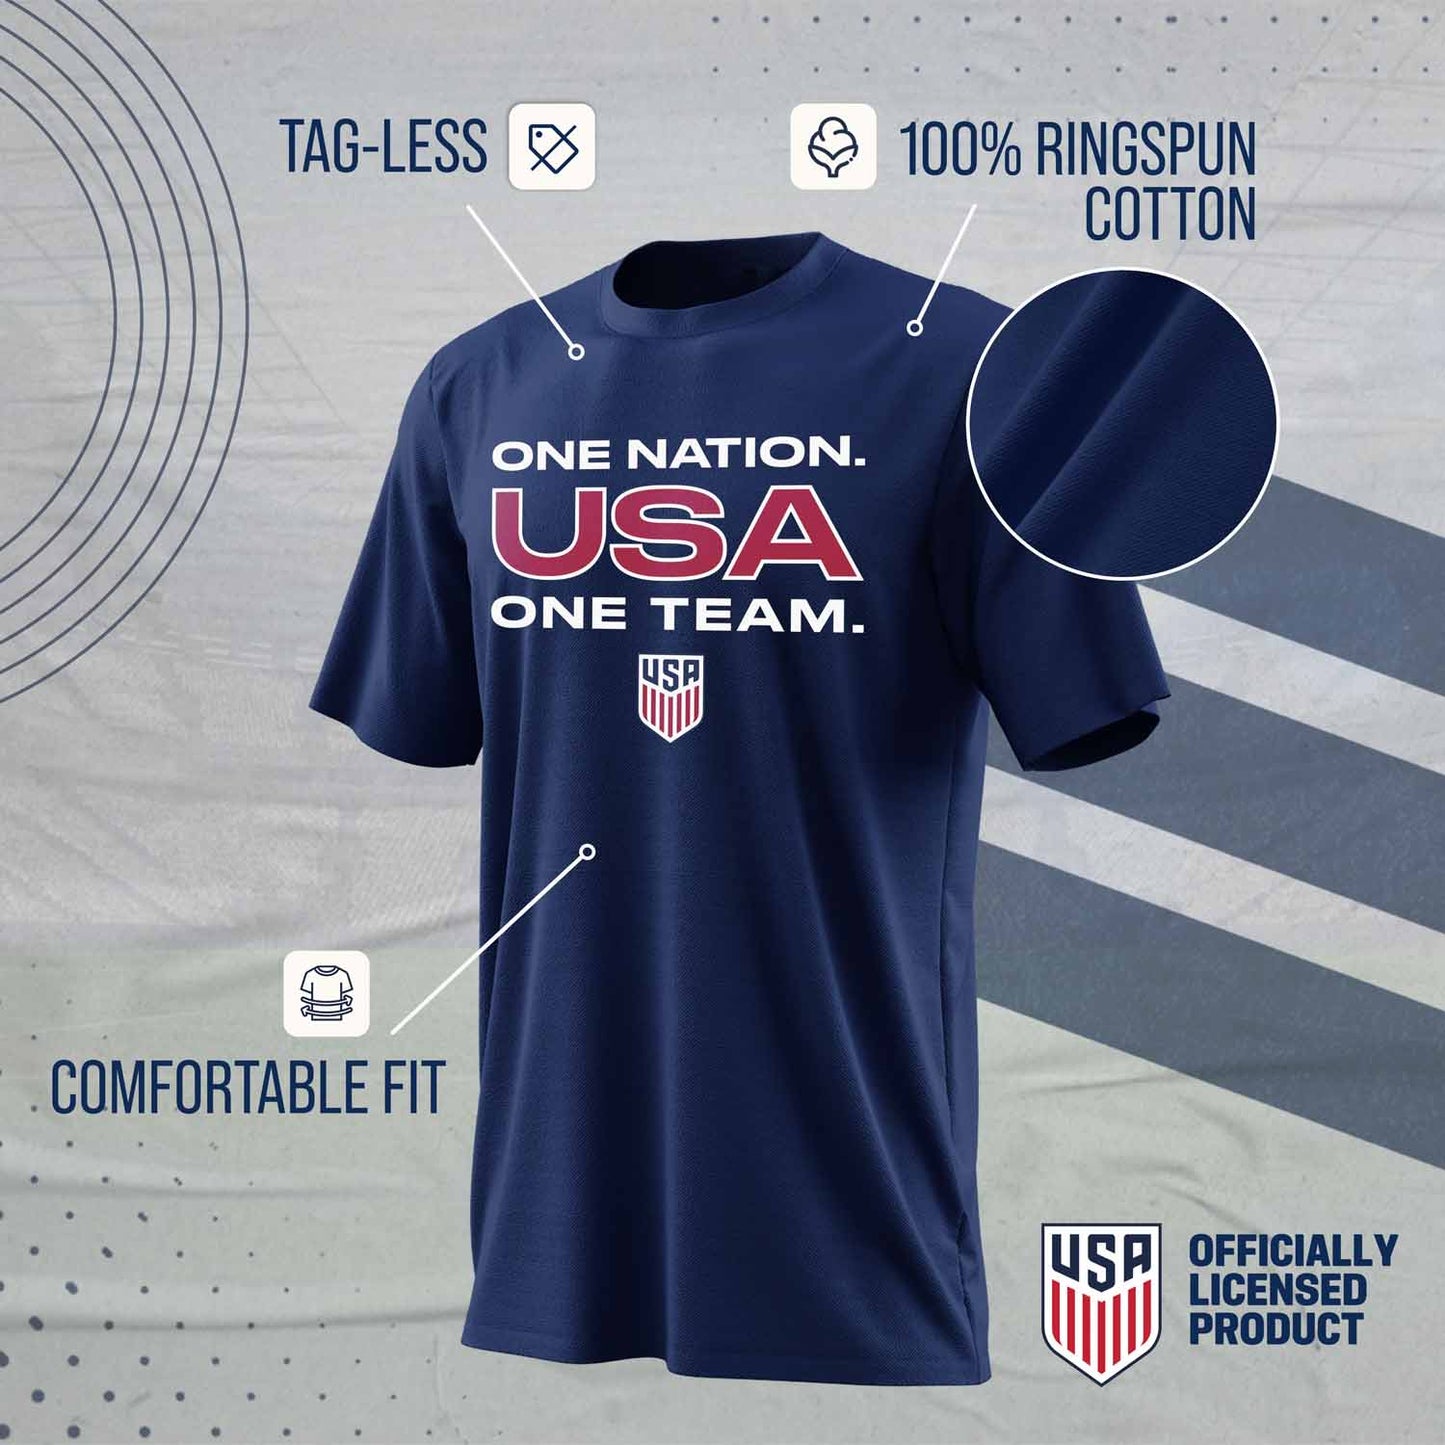 USA National Team Unisex Youth US National Soccer Team - Navy